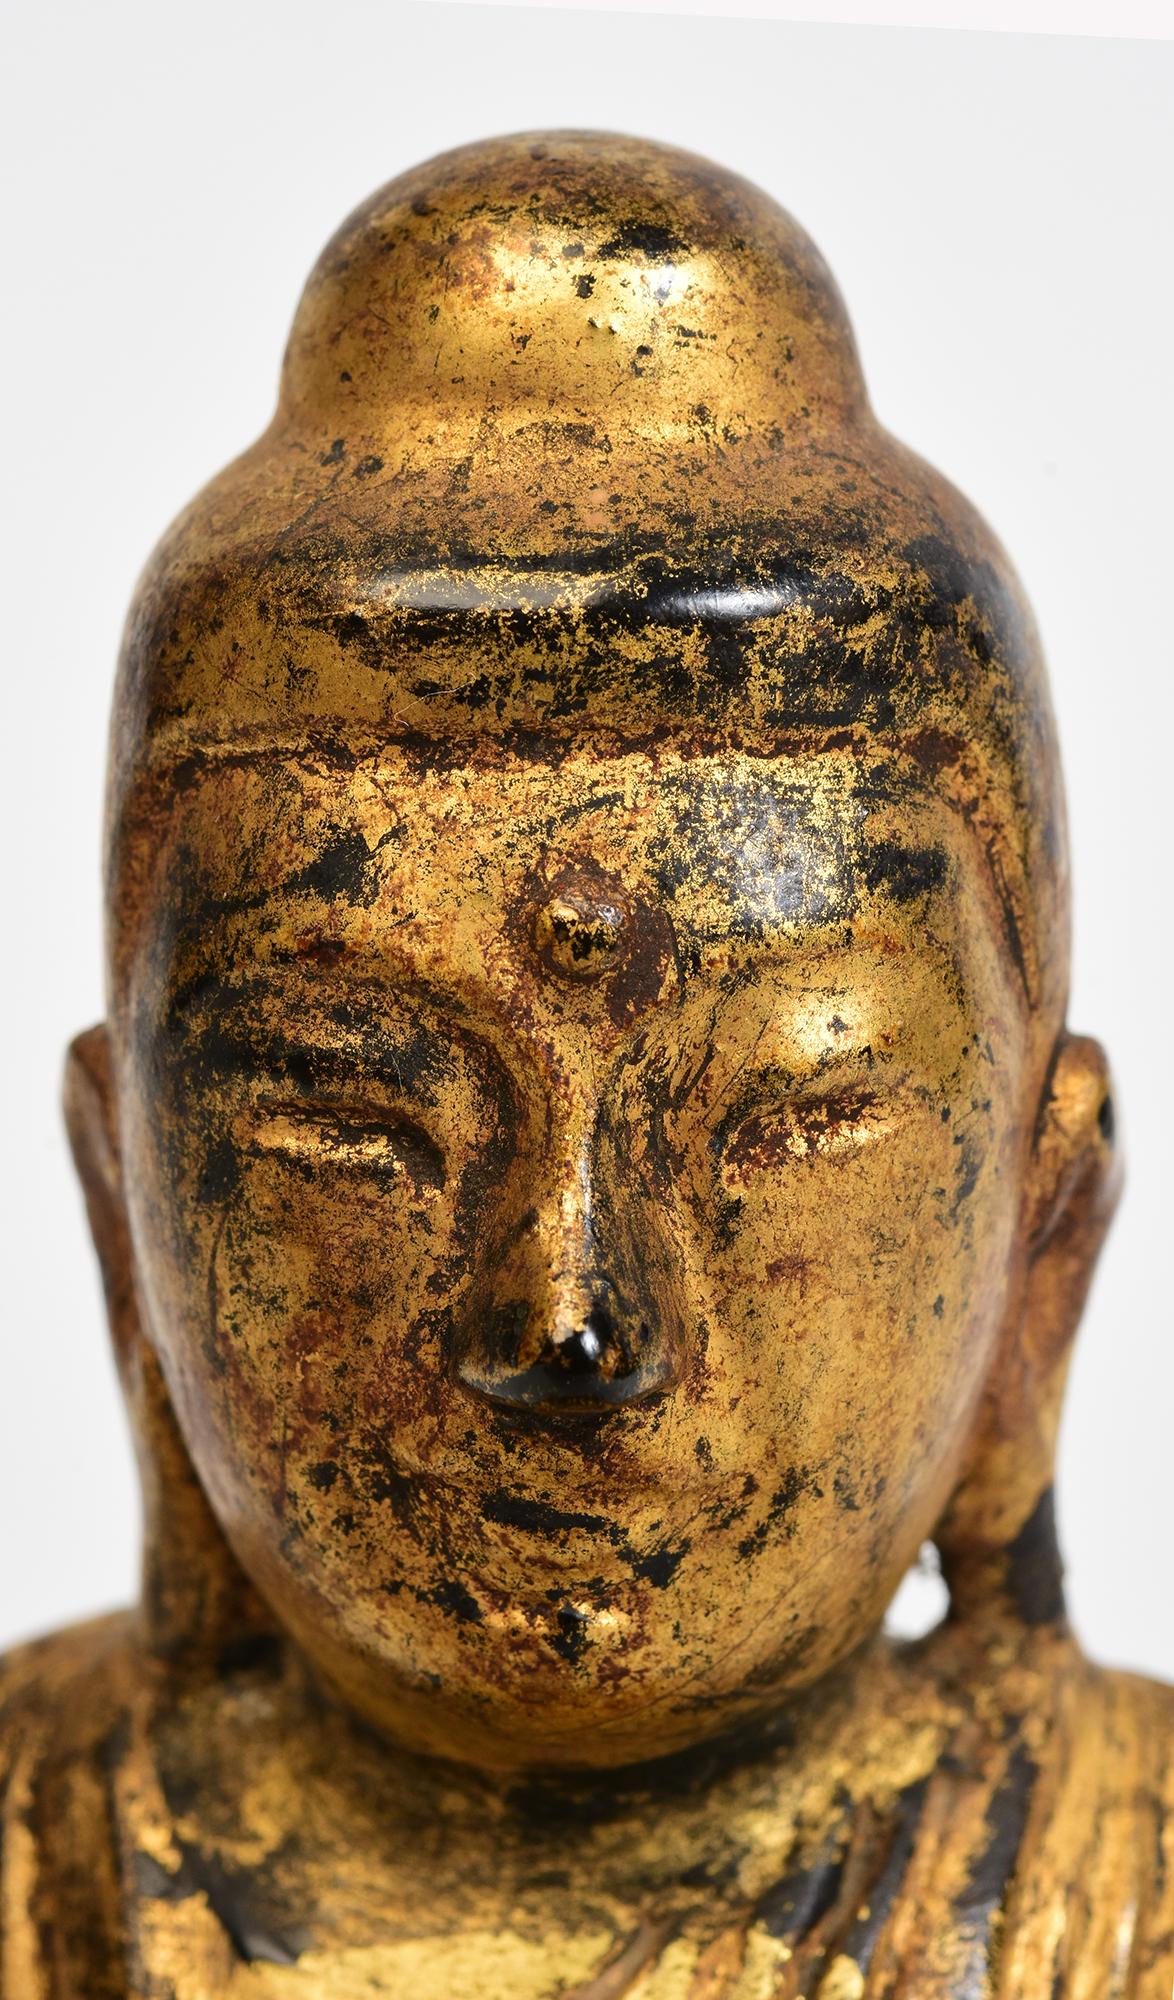 Antique Burmese wooden lotus Buddha sitting in Mara Vijaya (calling the earth to witness) posture on a base, with gilded gold.

Age: Burma, Mandalay Period, 19th Century
Size: Height 13 C.M. / Width 8.6 C.M. / Depth 4.2 C.M.
Condition: Nice